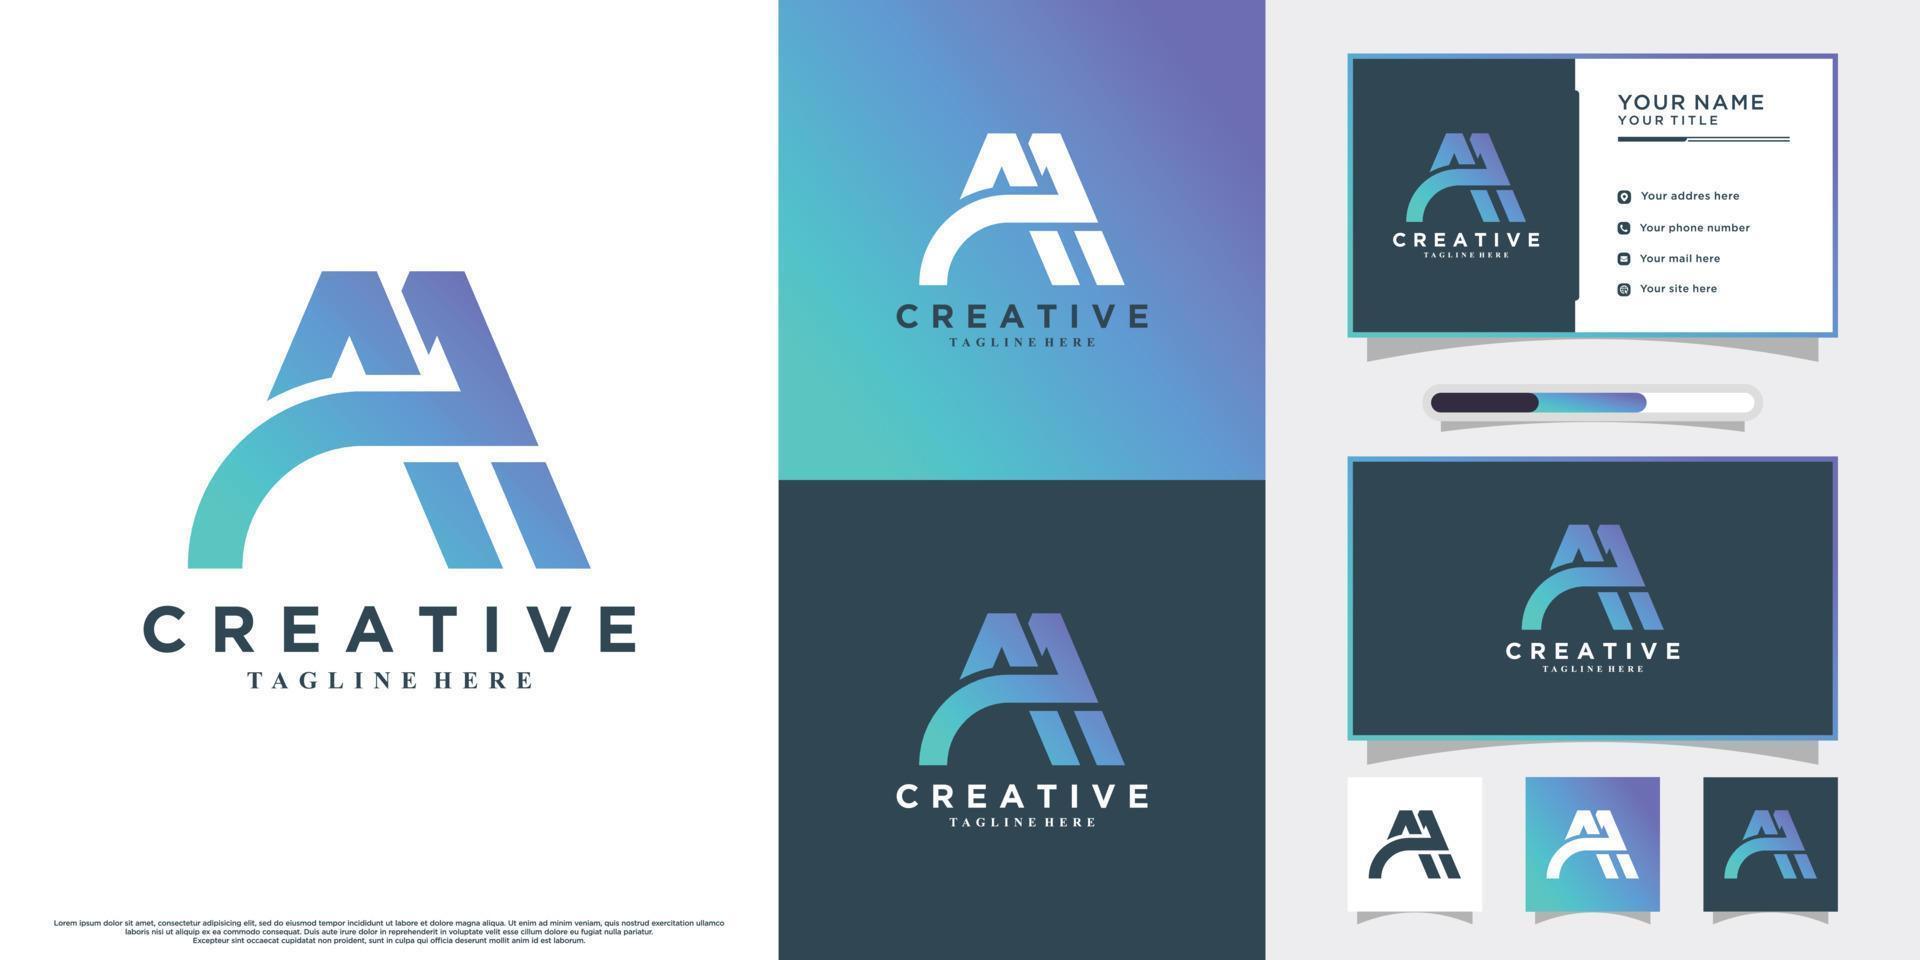 Monogram latter logo design initial aa for business with creative concept vector